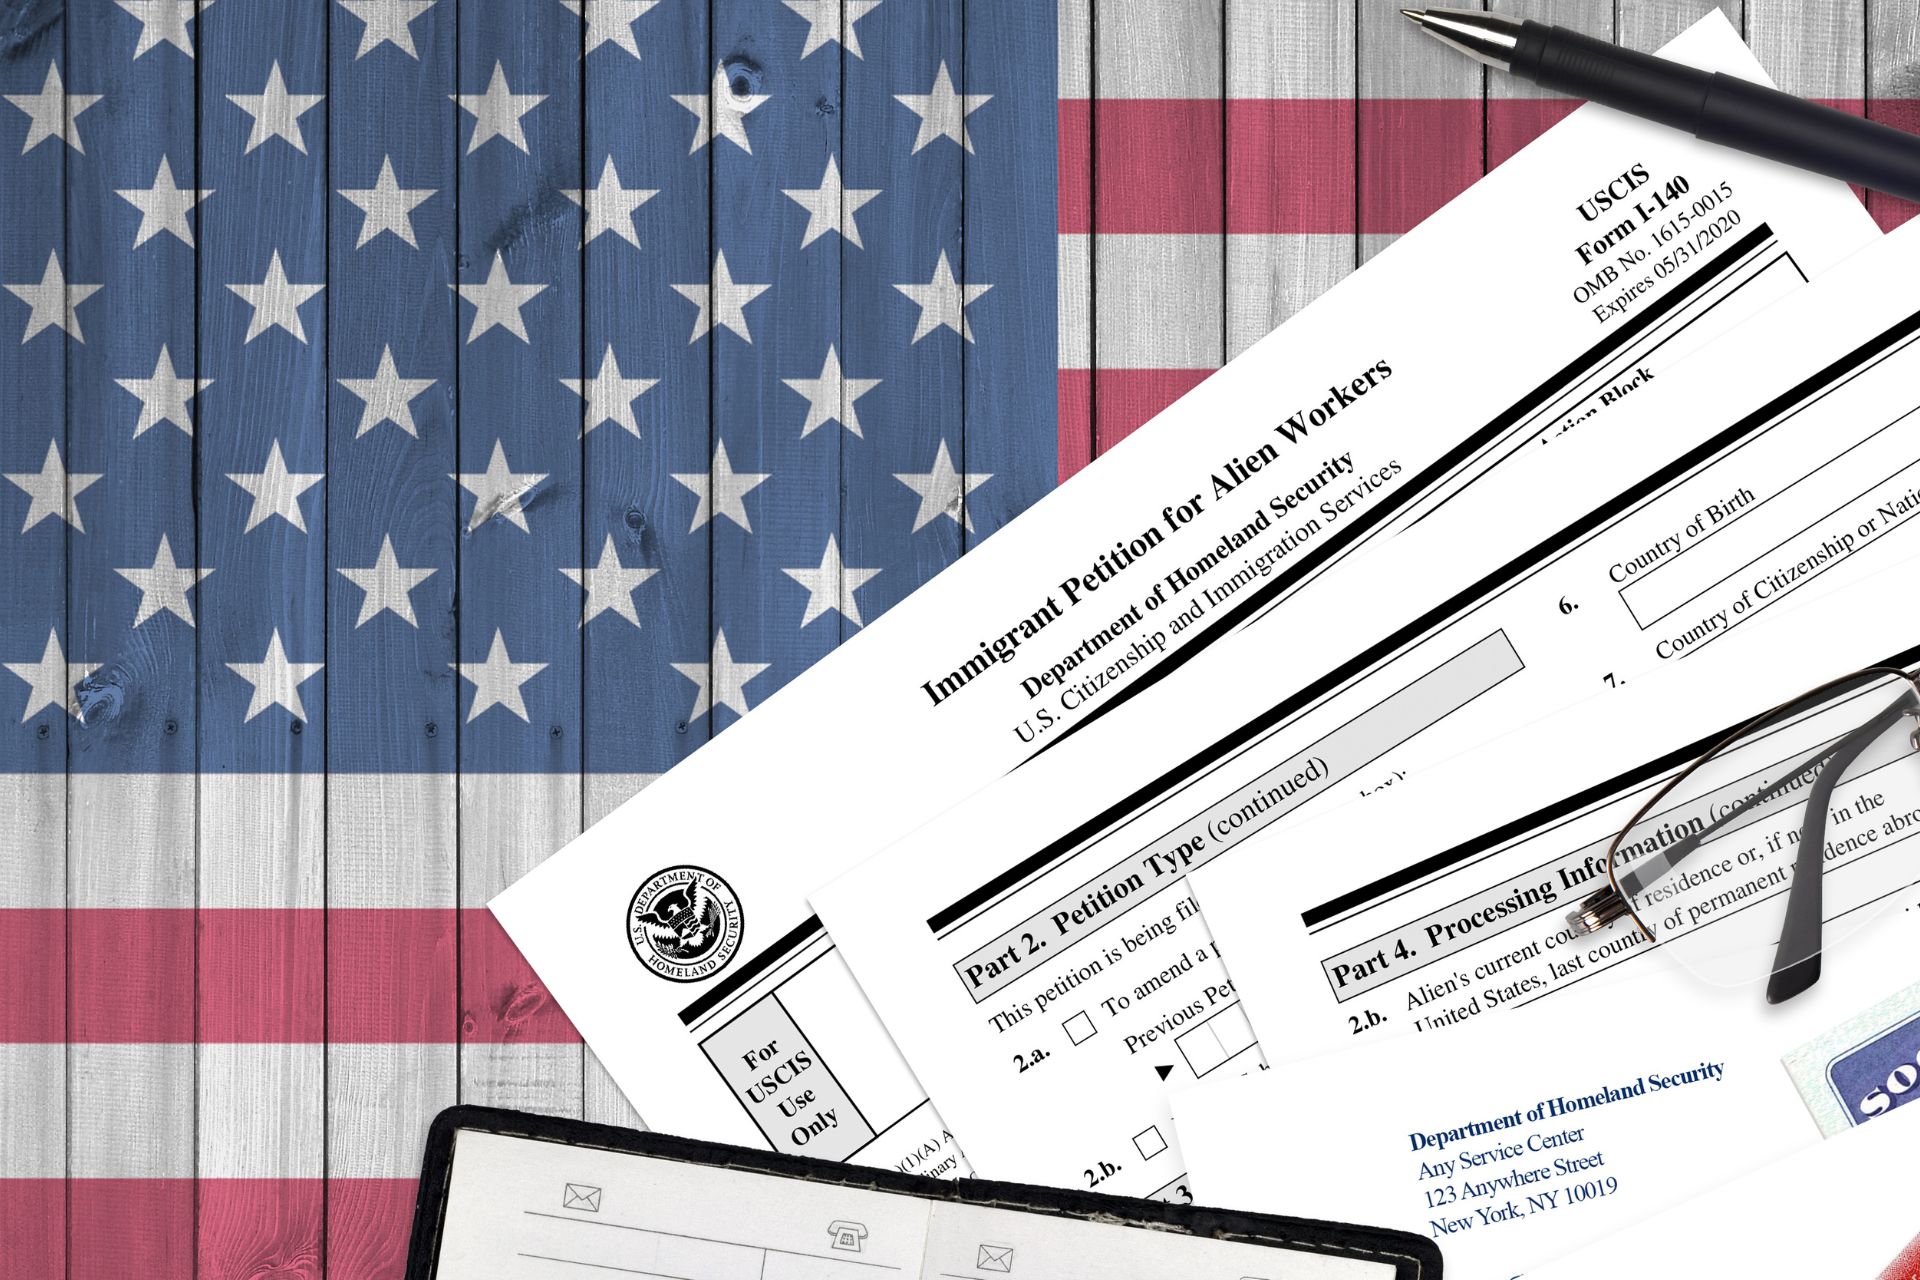 EB-2 vs EB-3 Green Card  Processing Time, Costs, Priority Date